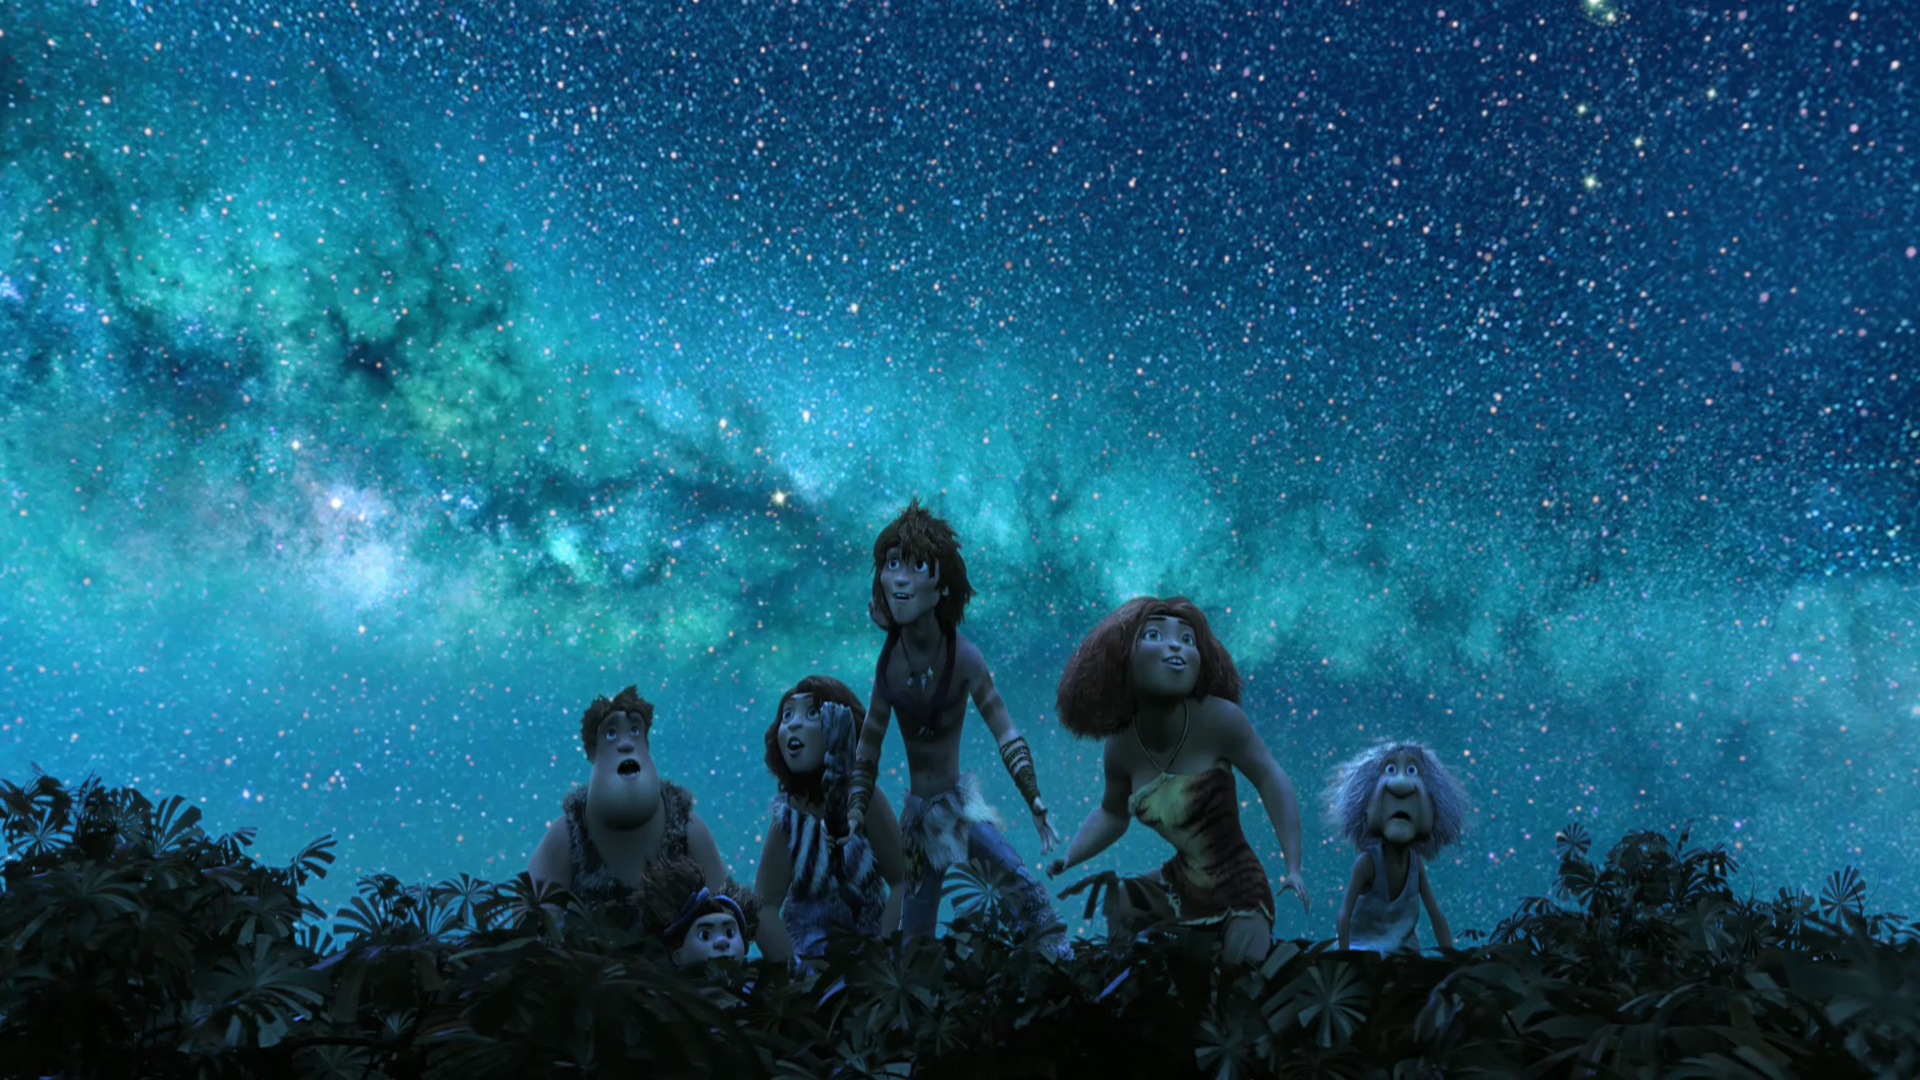 The Croods HD movie wallpapers #16 - 1920x1080